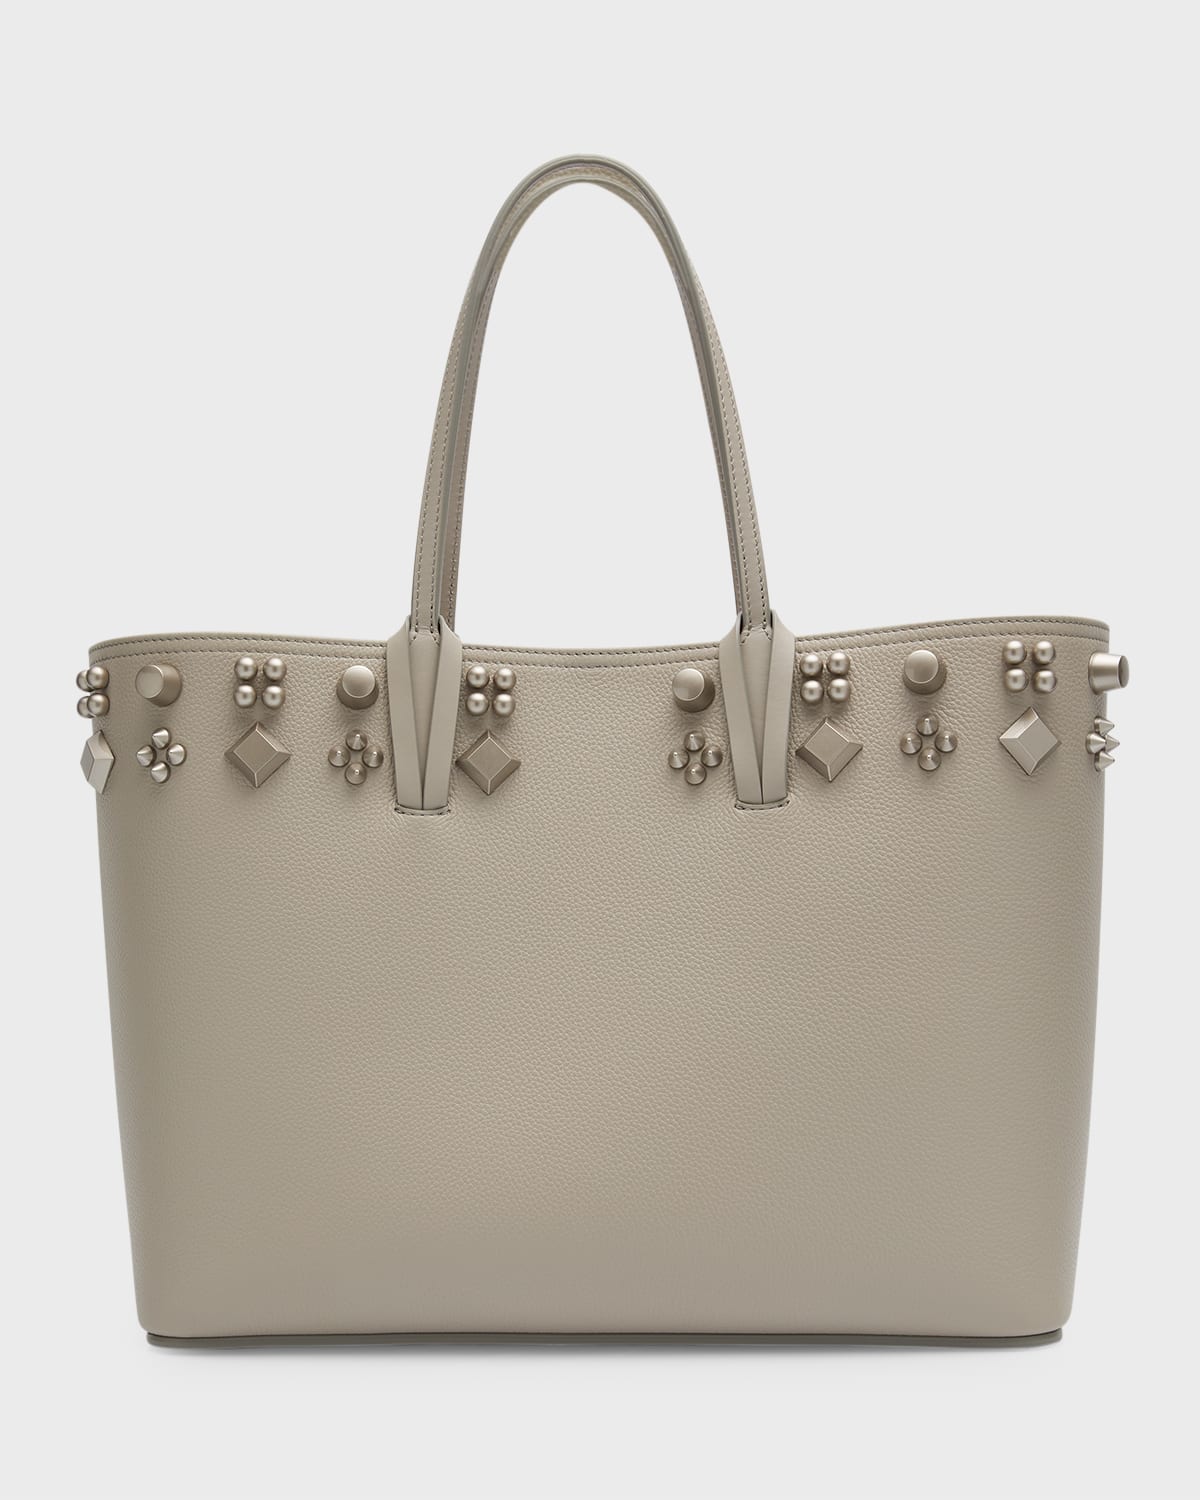 Christian Louboutin Cabata Empire Spike Studded Leather Tote Bag In Light Grey